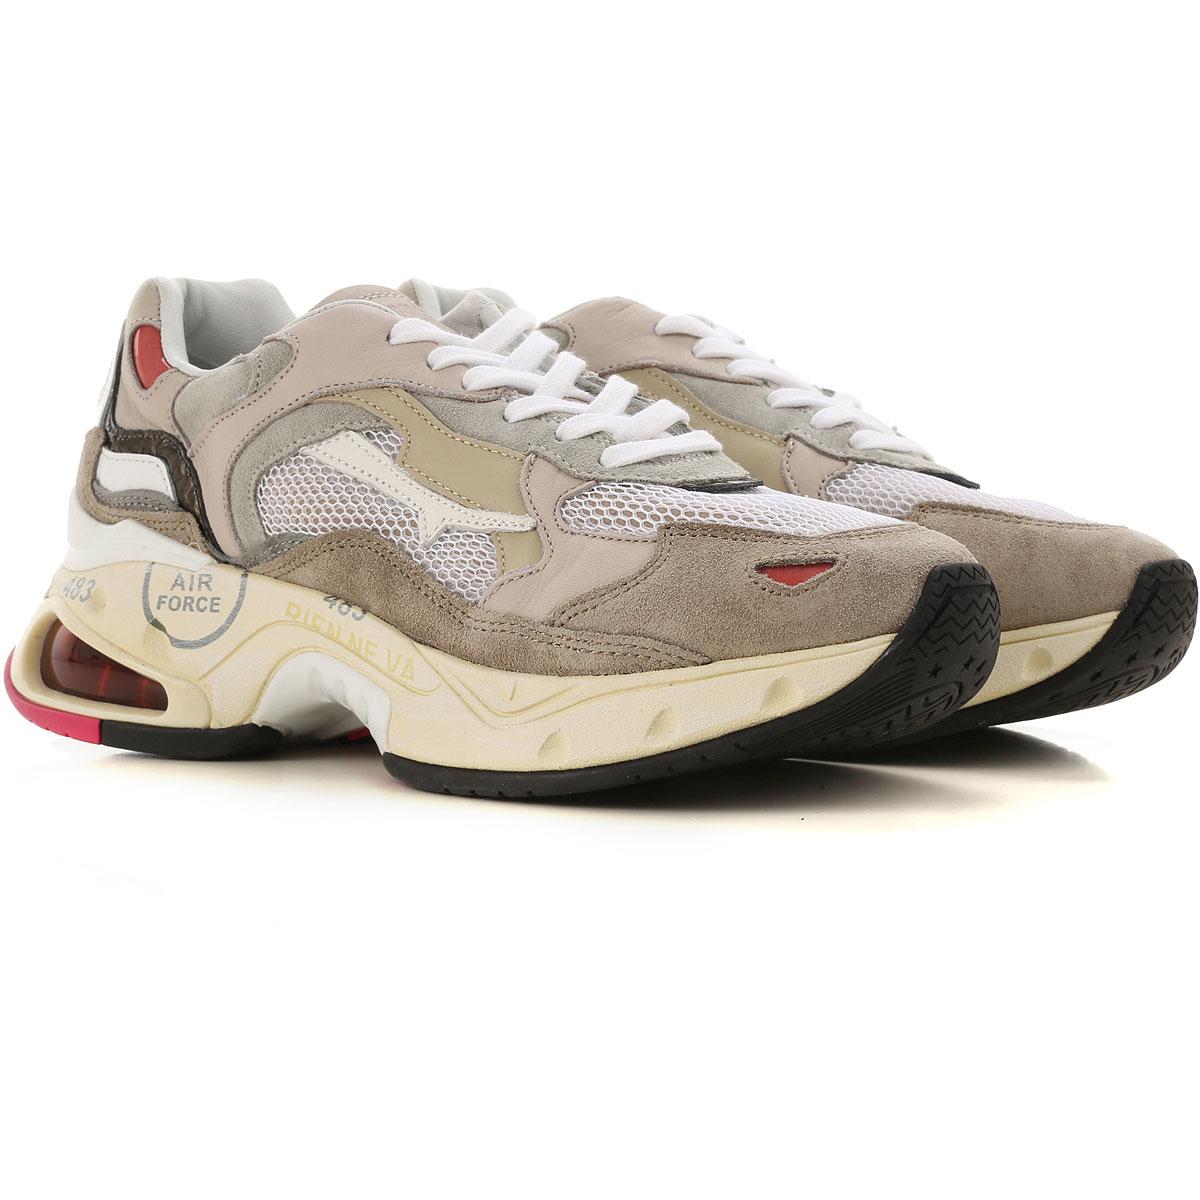 Premiata Suede Sneakers For Women On 